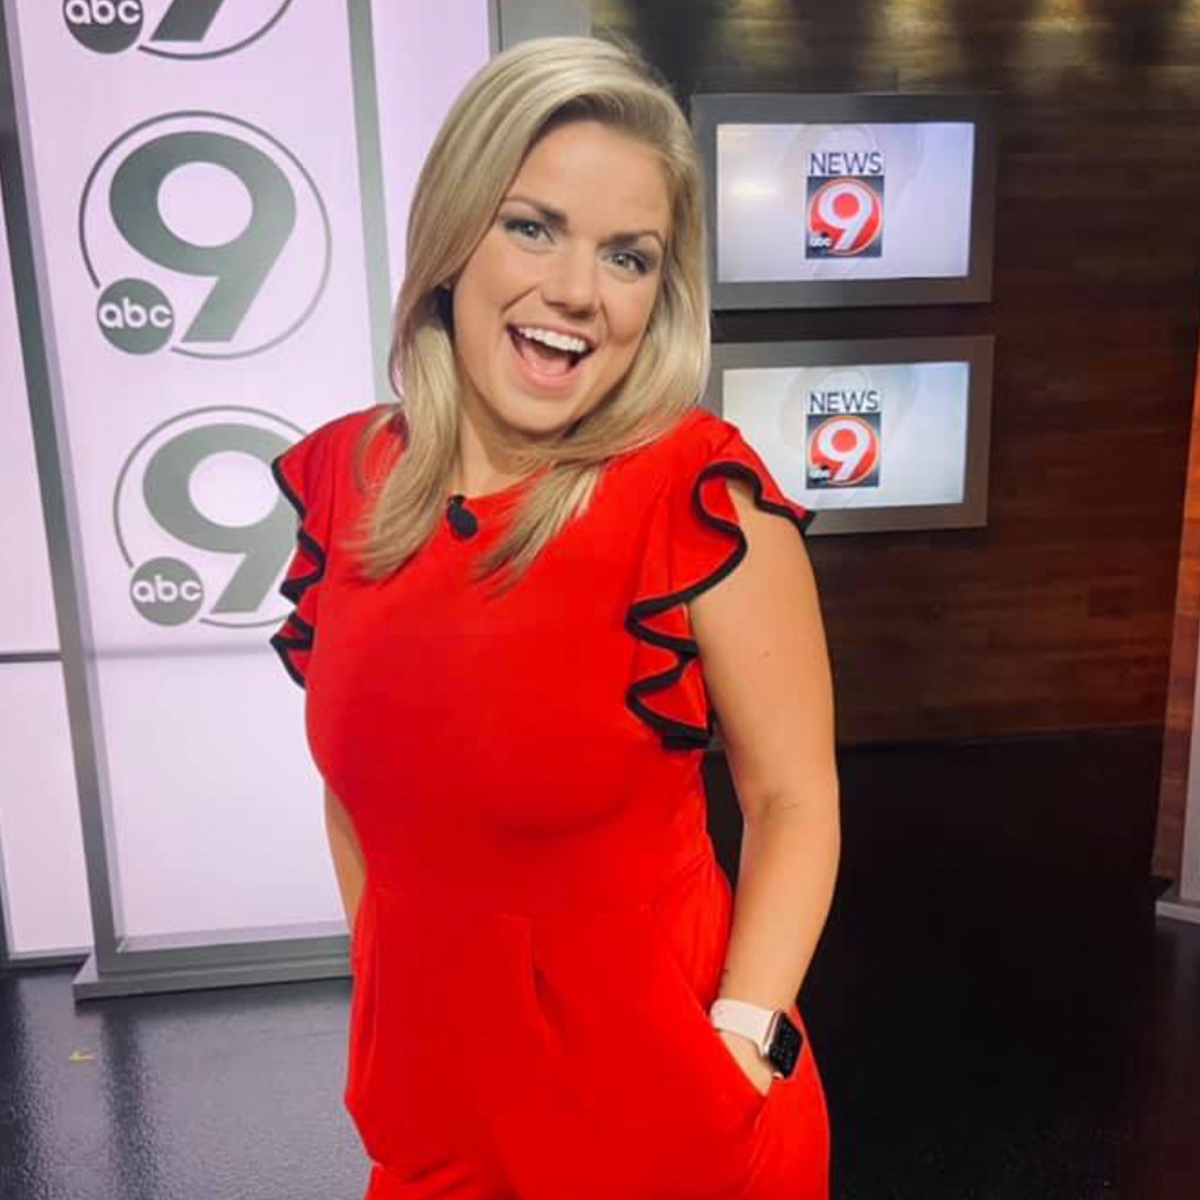 Wisconsin News Anchor Neena Pacholke Dead at 27